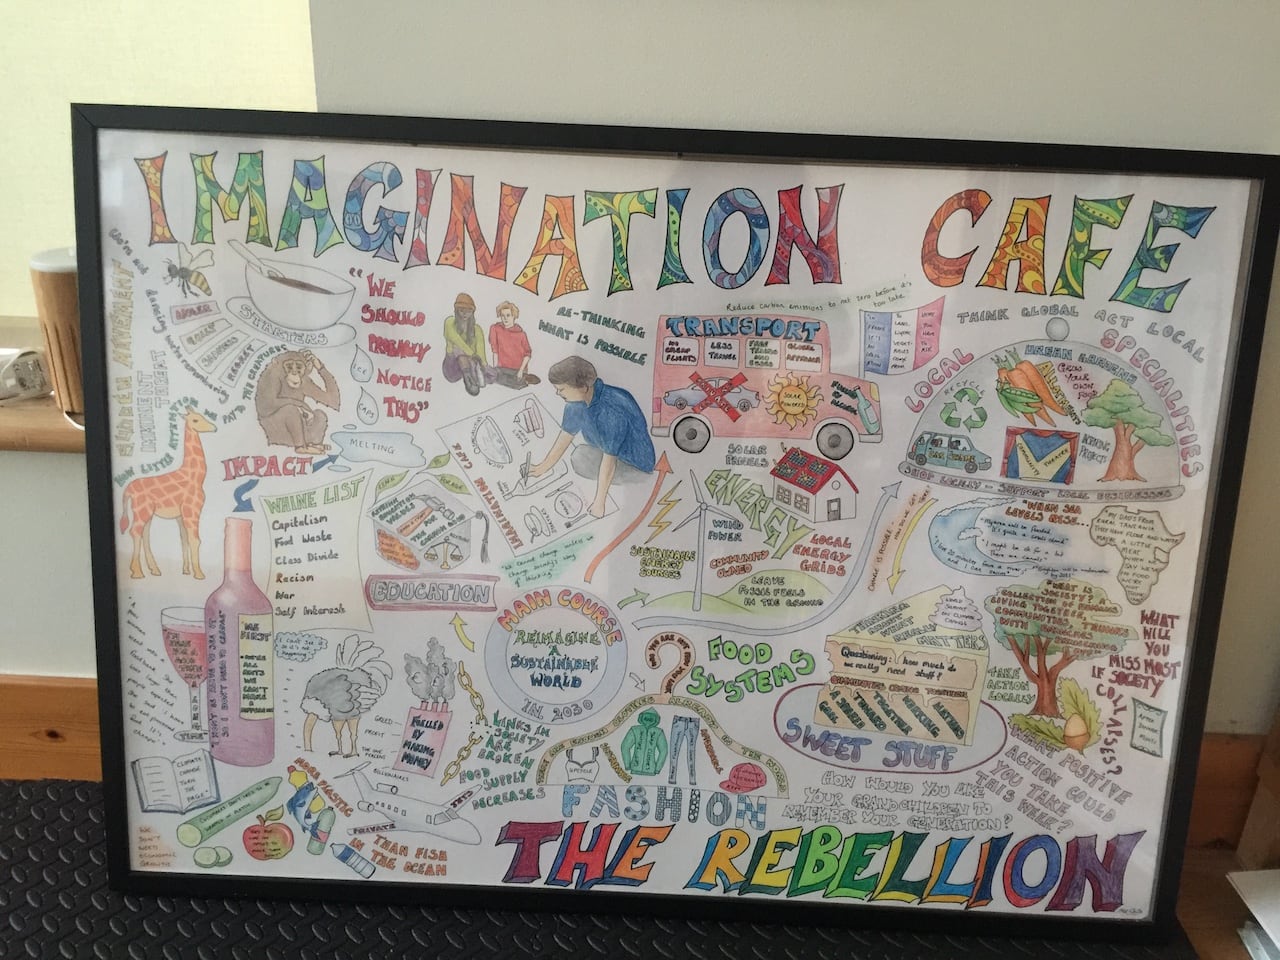 A hand drawn noticeboard for a community "Imagination Café" with drawings about the environmental impacts and solutions